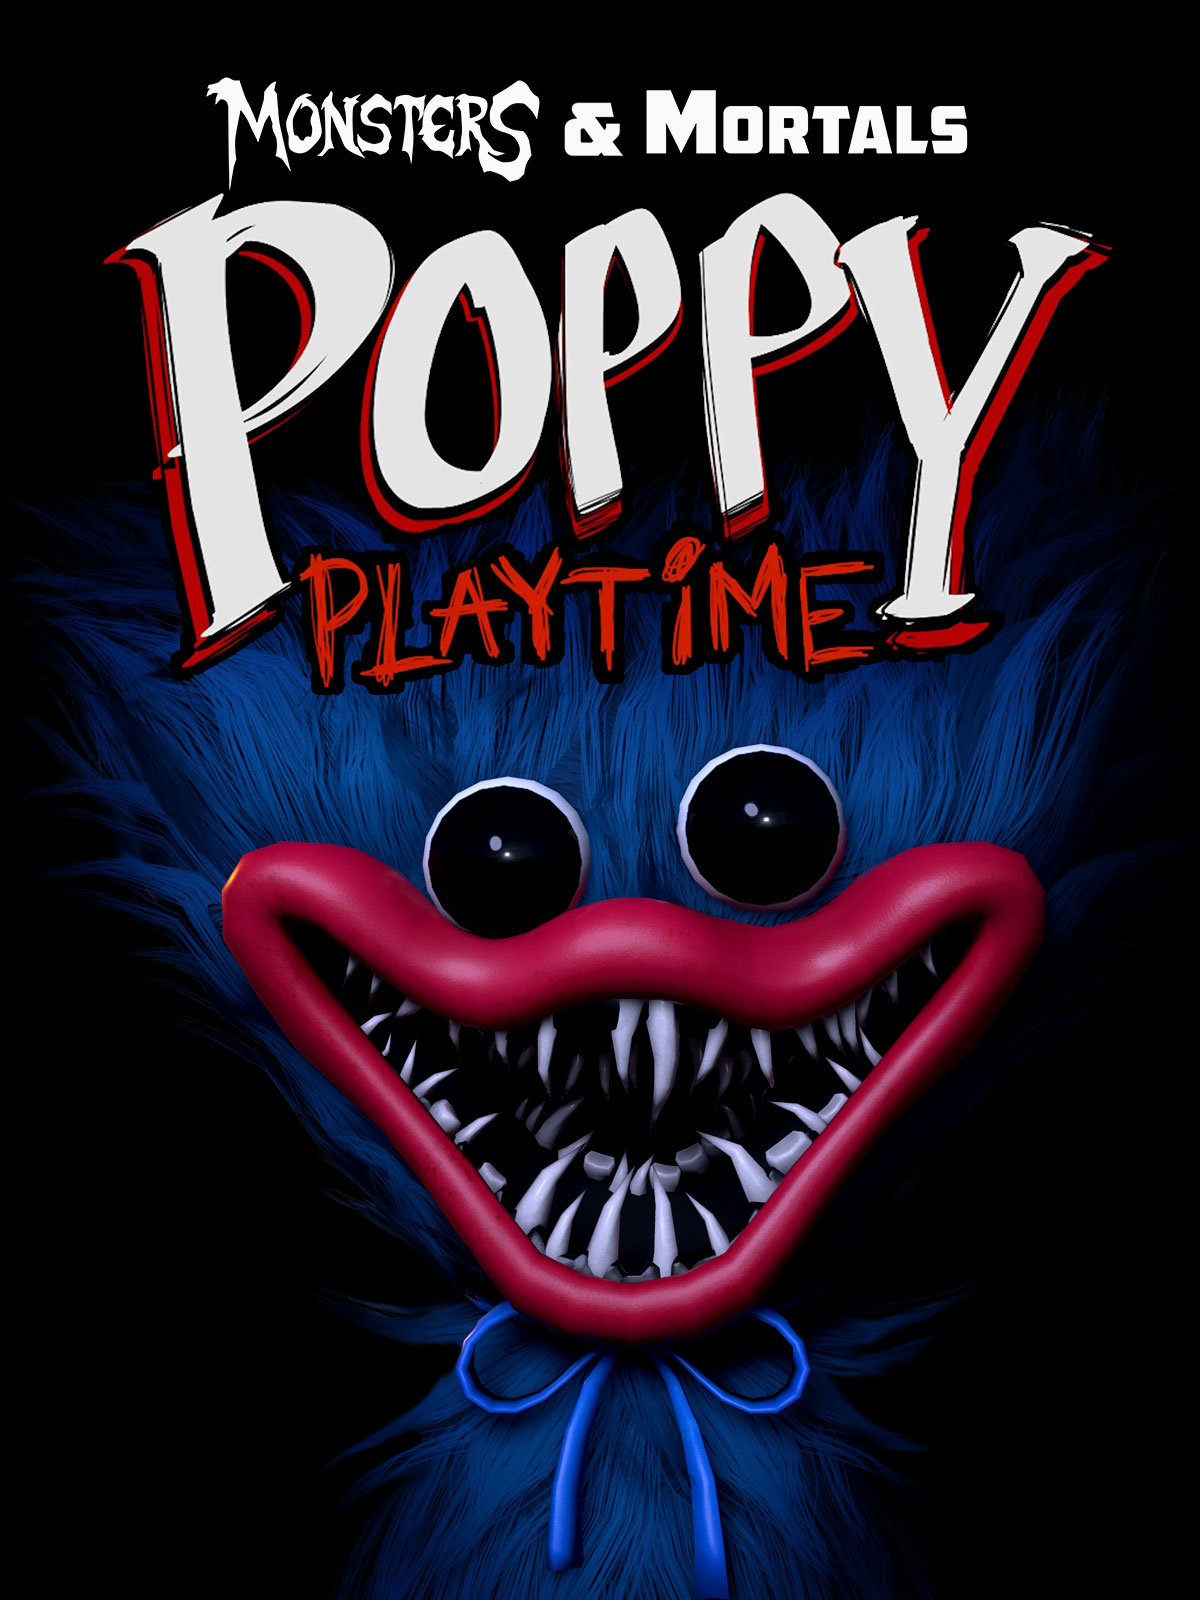 Boxy boo! Poppy playtime  Play time, Horror game, Poppies